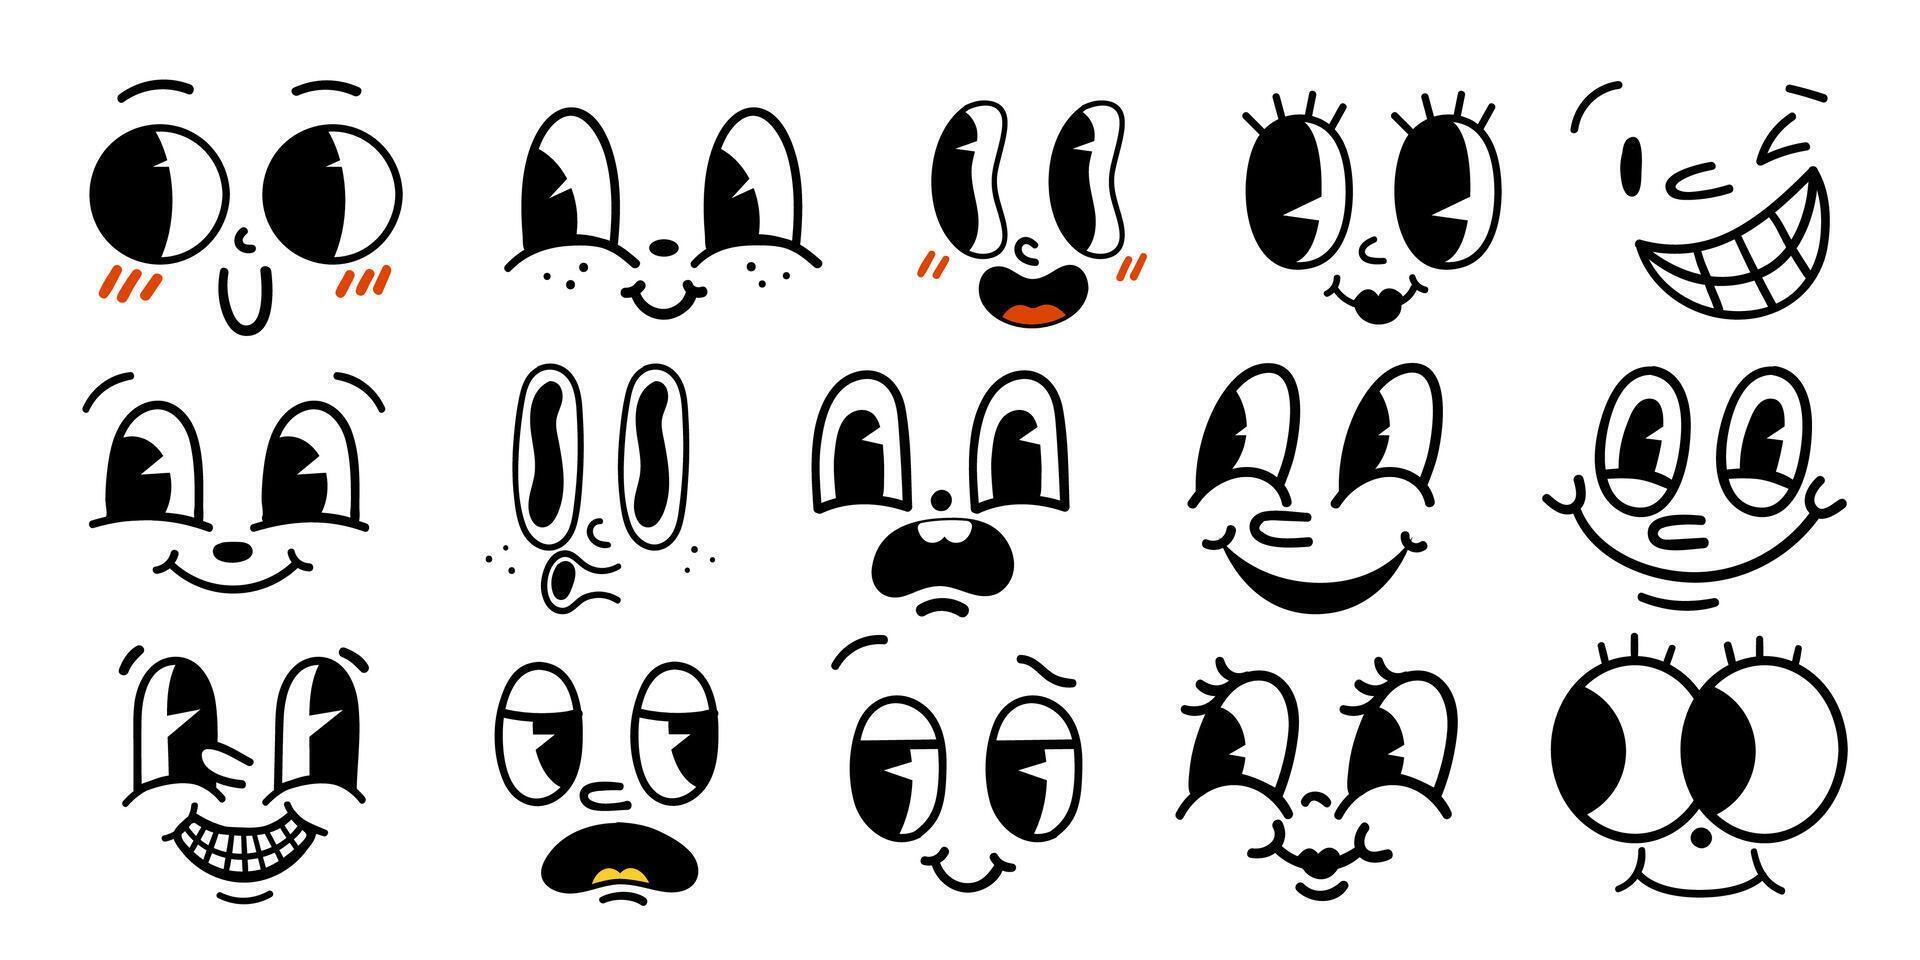 Set of 70s groovy comic faces vector. Collection of cartoon character faces, in different emotions, happy, angry, sad, cheerful. Cute retro groovy hippie illustration for decorative, sticker vector